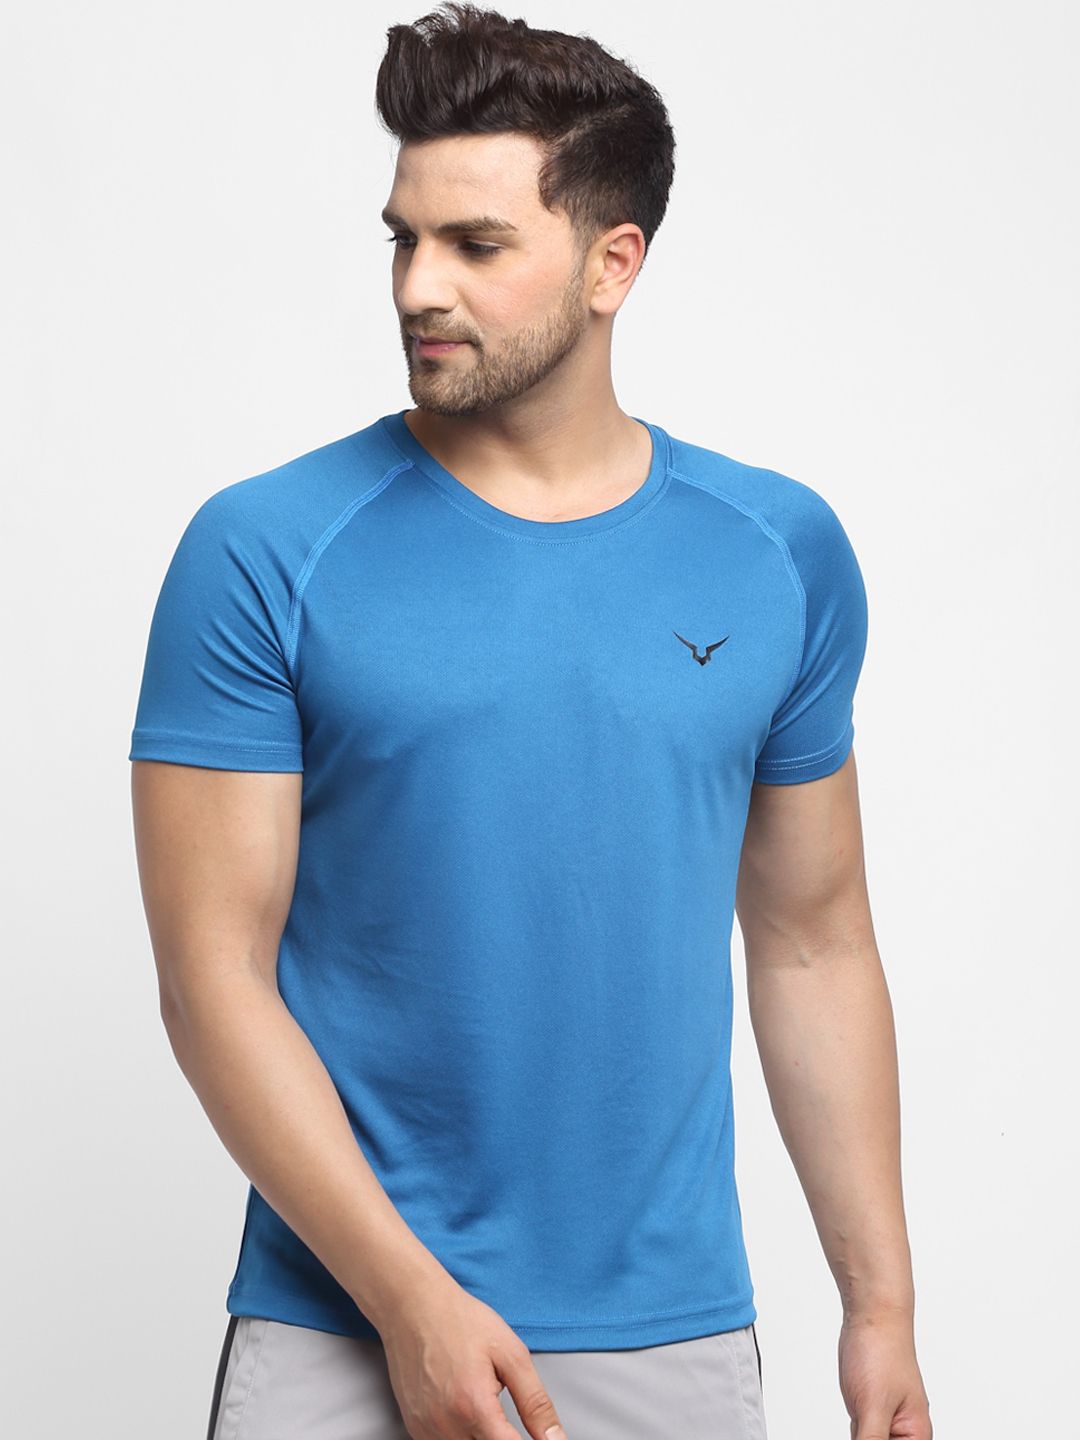 Invincible casual t shirts - Buy Invincible casual t shirts online in India